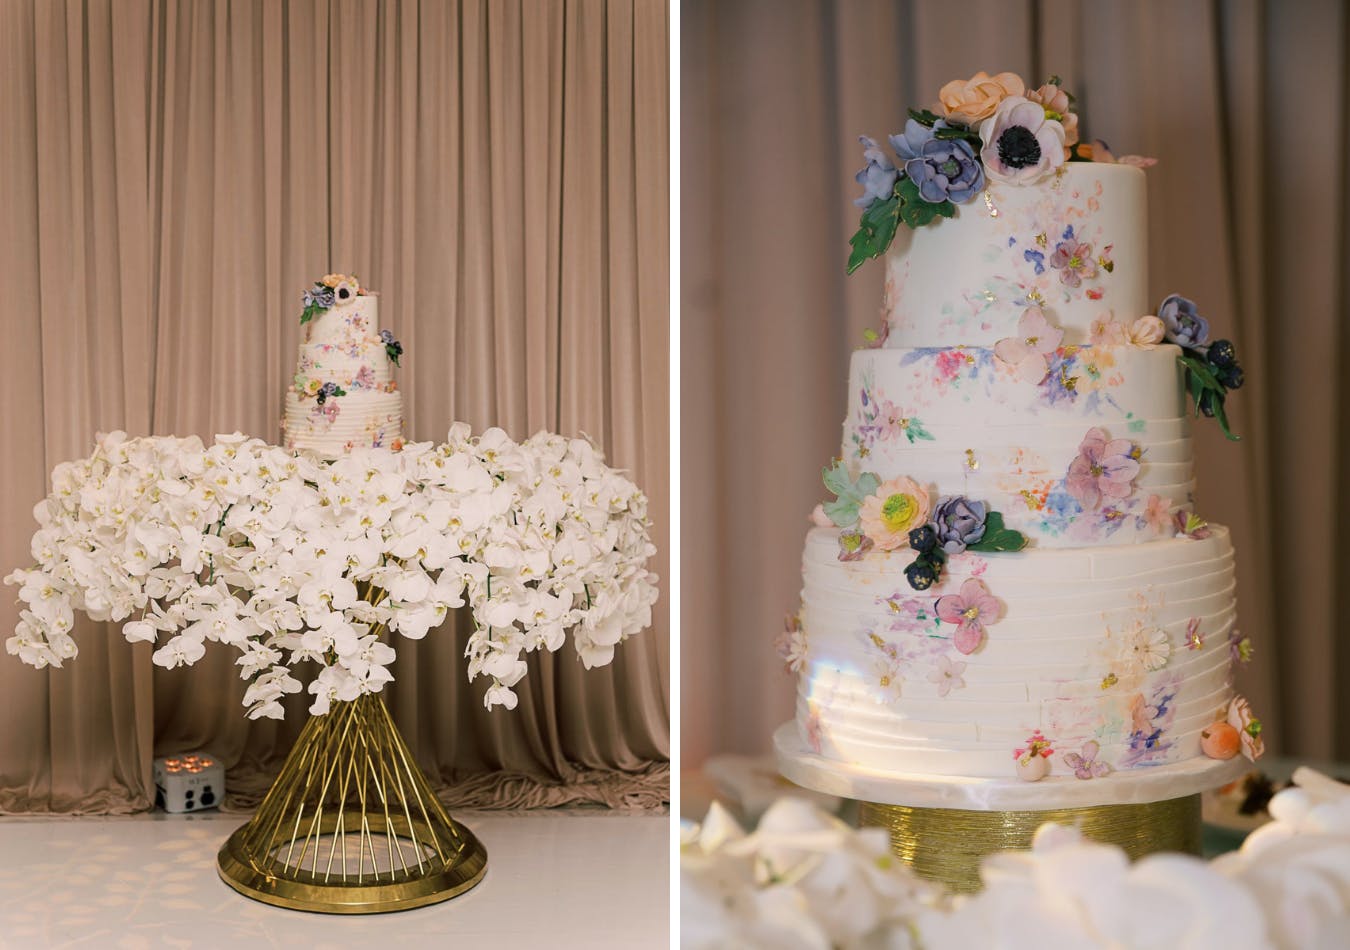 Pressed floral wedding cake on gold cake stand with hanging white orchids | PartySlate